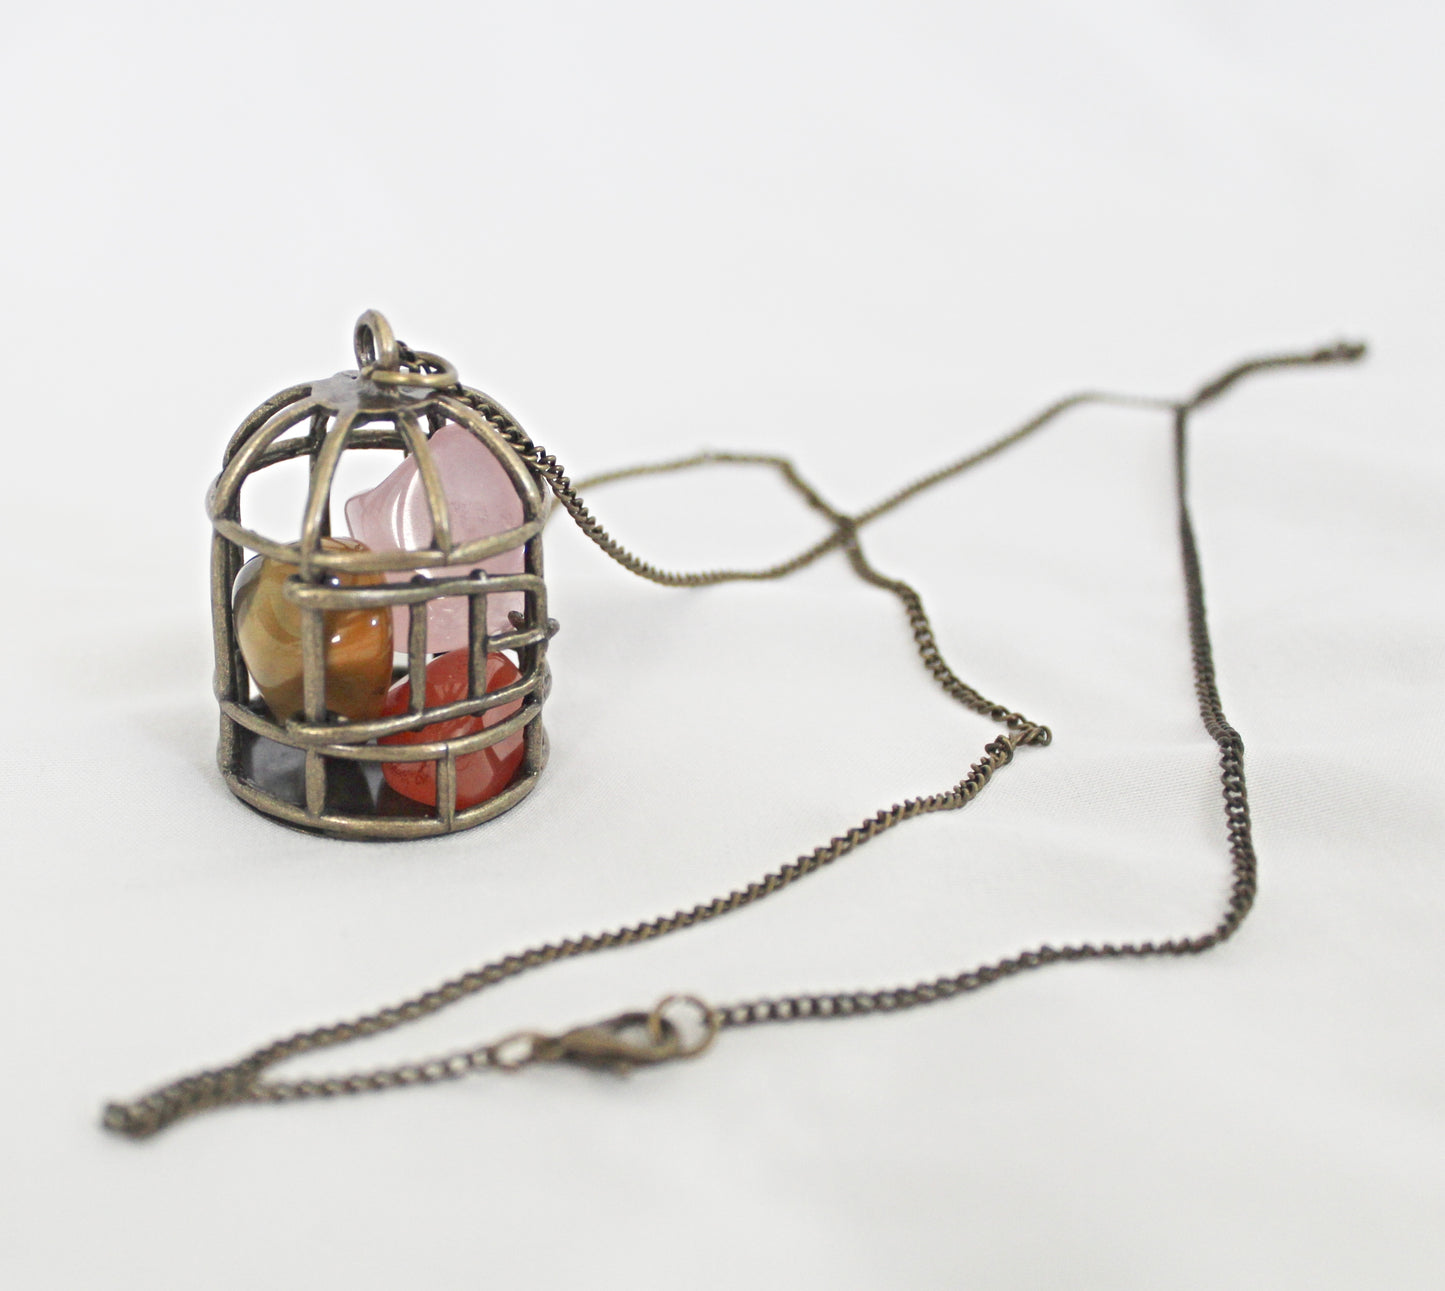 Birdcage Crystal Necklace featuring Mookaite, Rose Quartz, and Carnelian